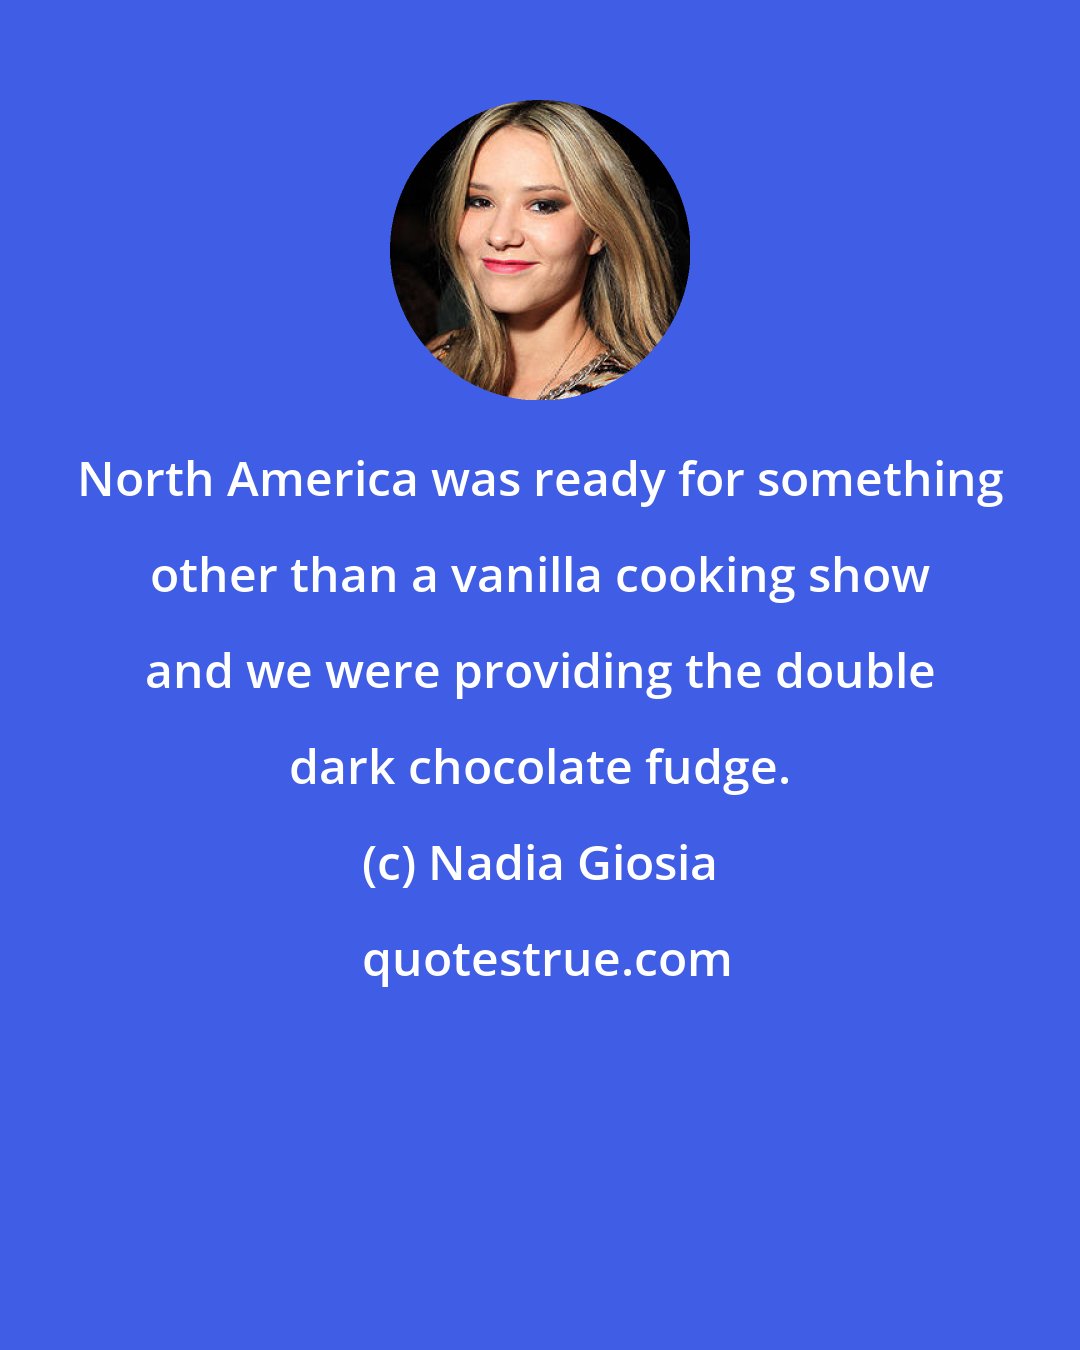 Nadia Giosia: North America was ready for something other than a vanilla cooking show and we were providing the double dark chocolate fudge.